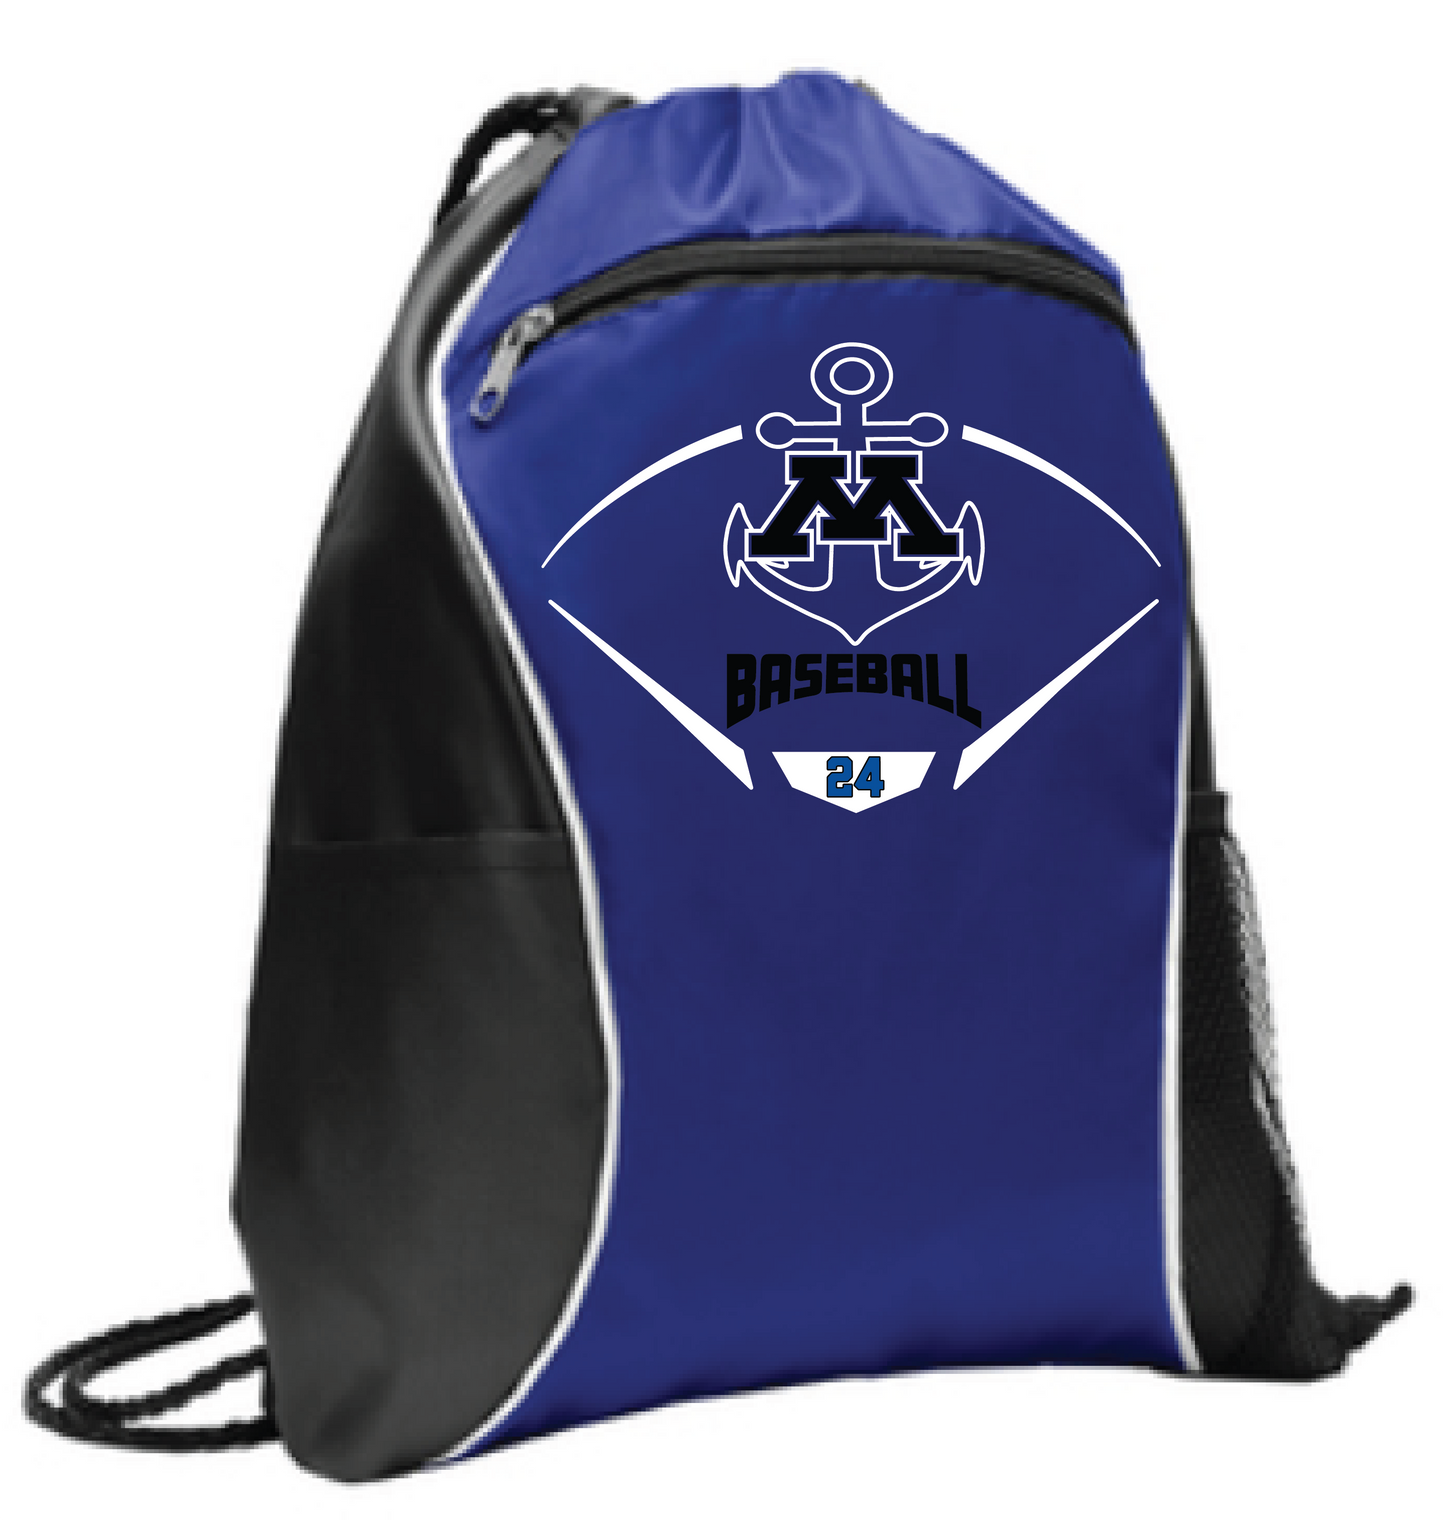 MBA Drawstring Bag With Side Pockets